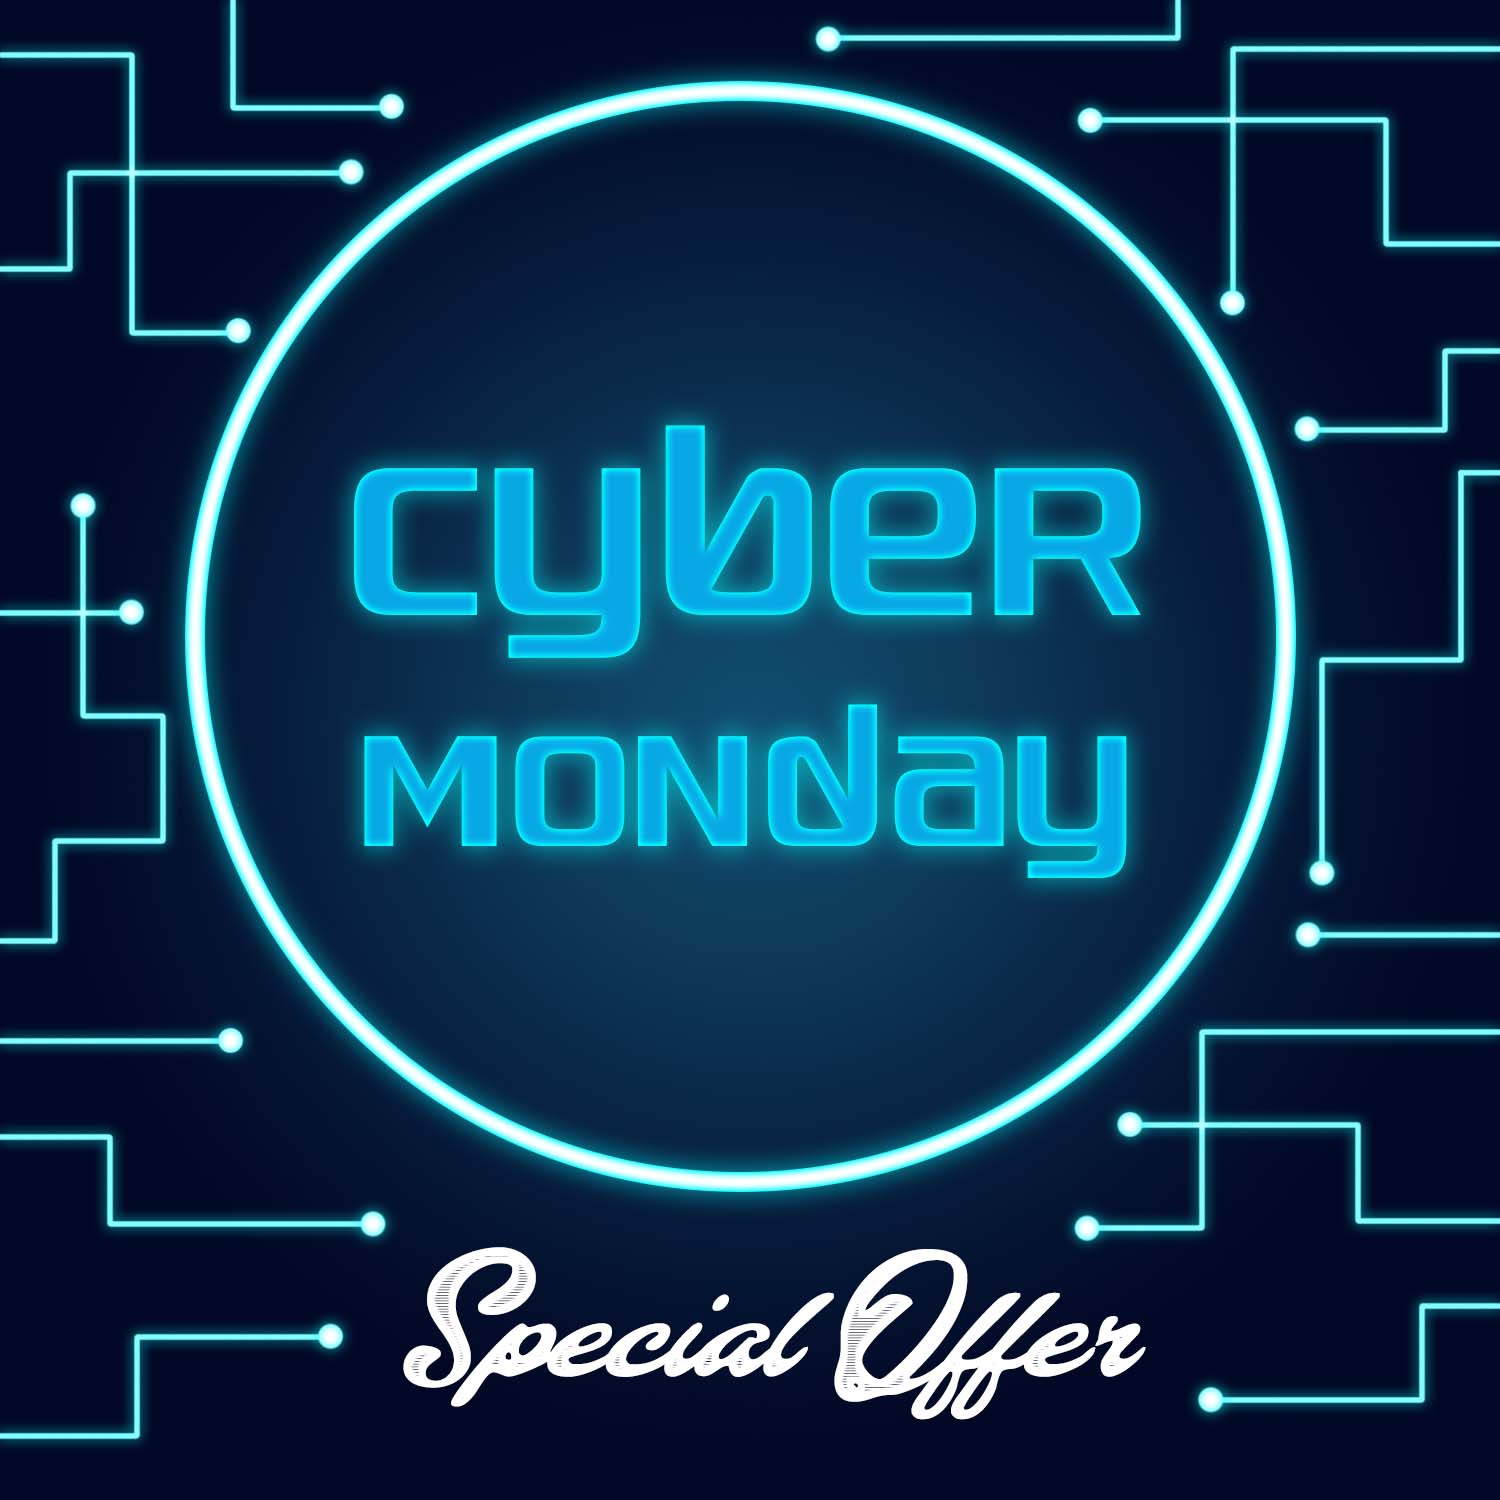 Cyber Monday Background Free Vector cover.